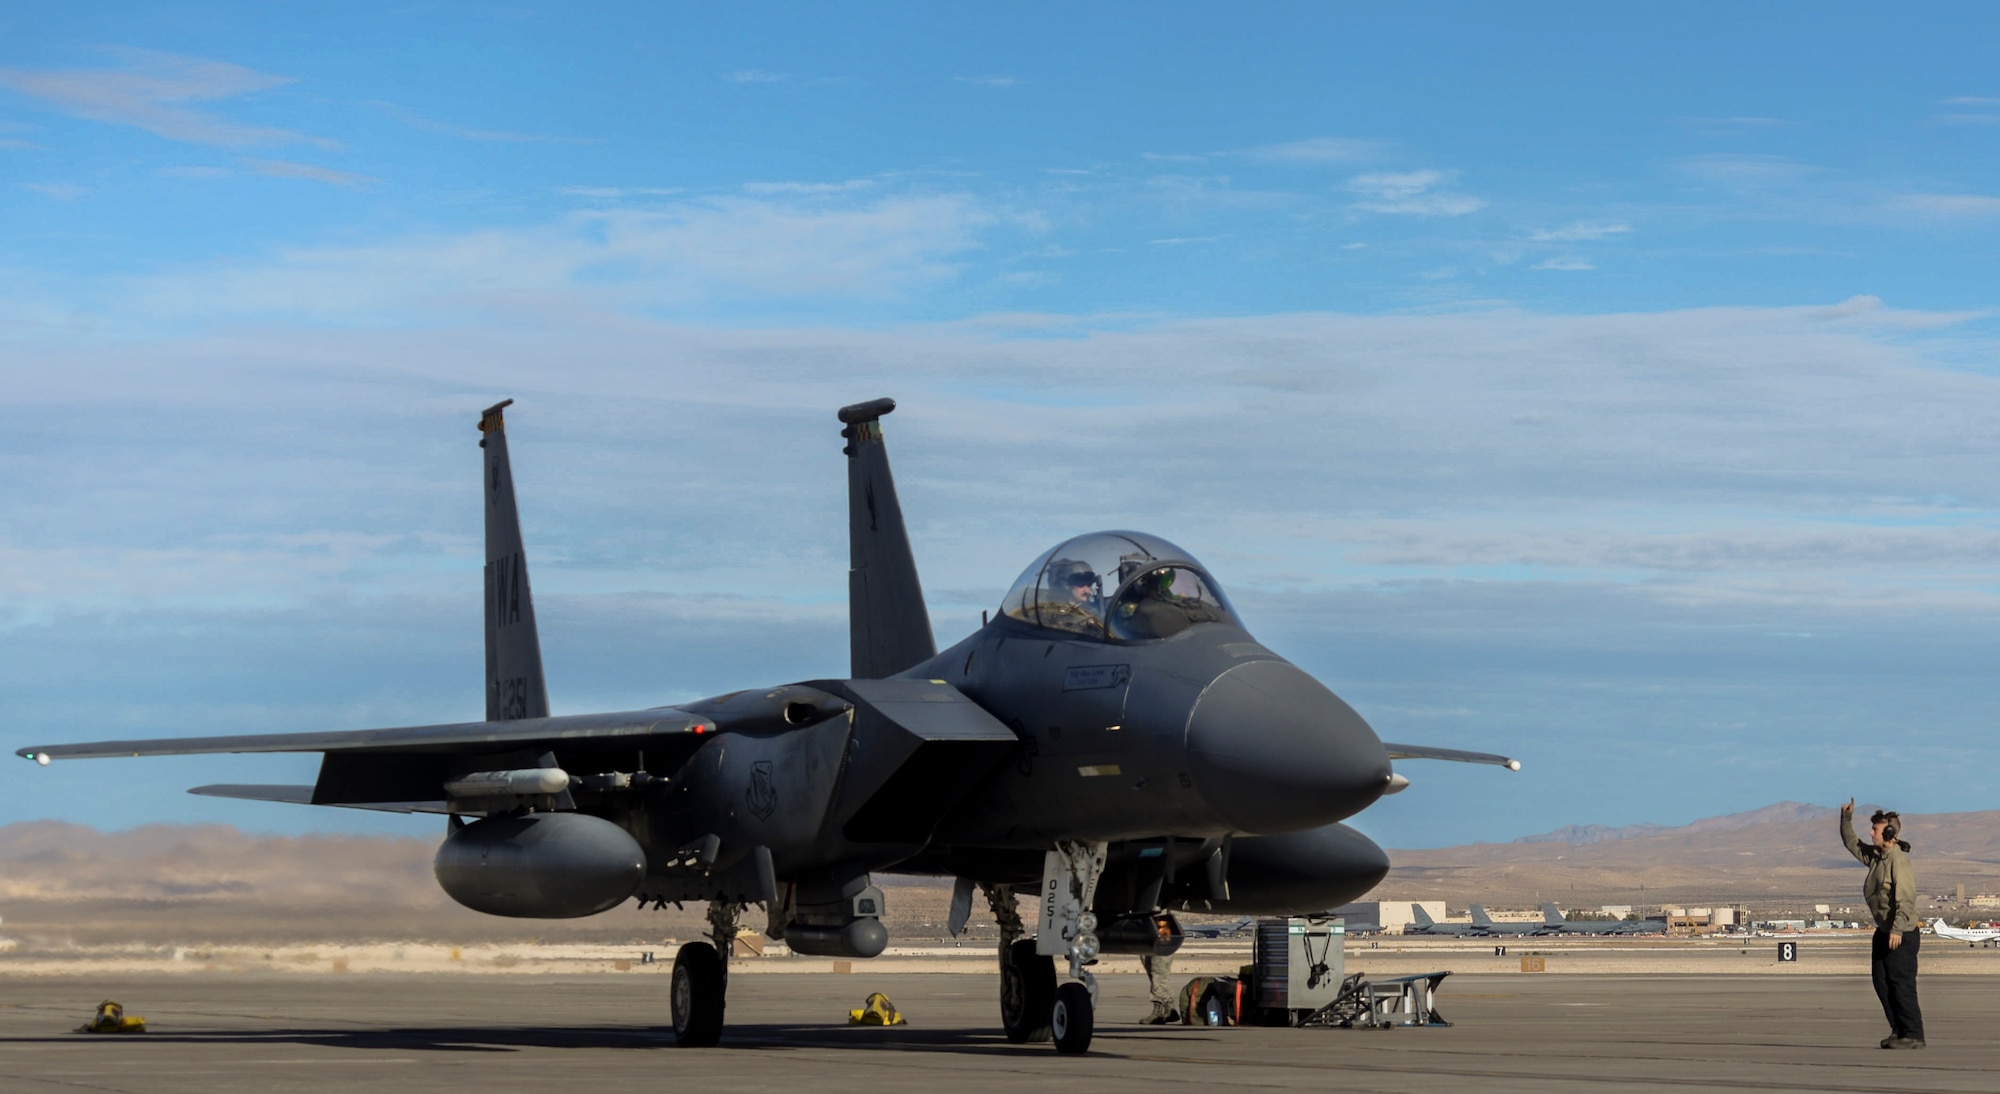 Airman 1st Class Clayton Ackerman, 757th Aircraft Maintenance Squadron Strike Aircraft Maintenance Unit F-15E Strike Eagle fighter jet maintainer, launches an F-15E during the Weapons School Integration (WSINT) Dec. 4, 2018 at Nellis Air Force Base, Nevada. Completing WSINT requires a working relationship with aircraft maintainers, whose roles in the exercise are vital. (U.S. Air Force photo by Airman 1st Class Bailee A. Darbasie)